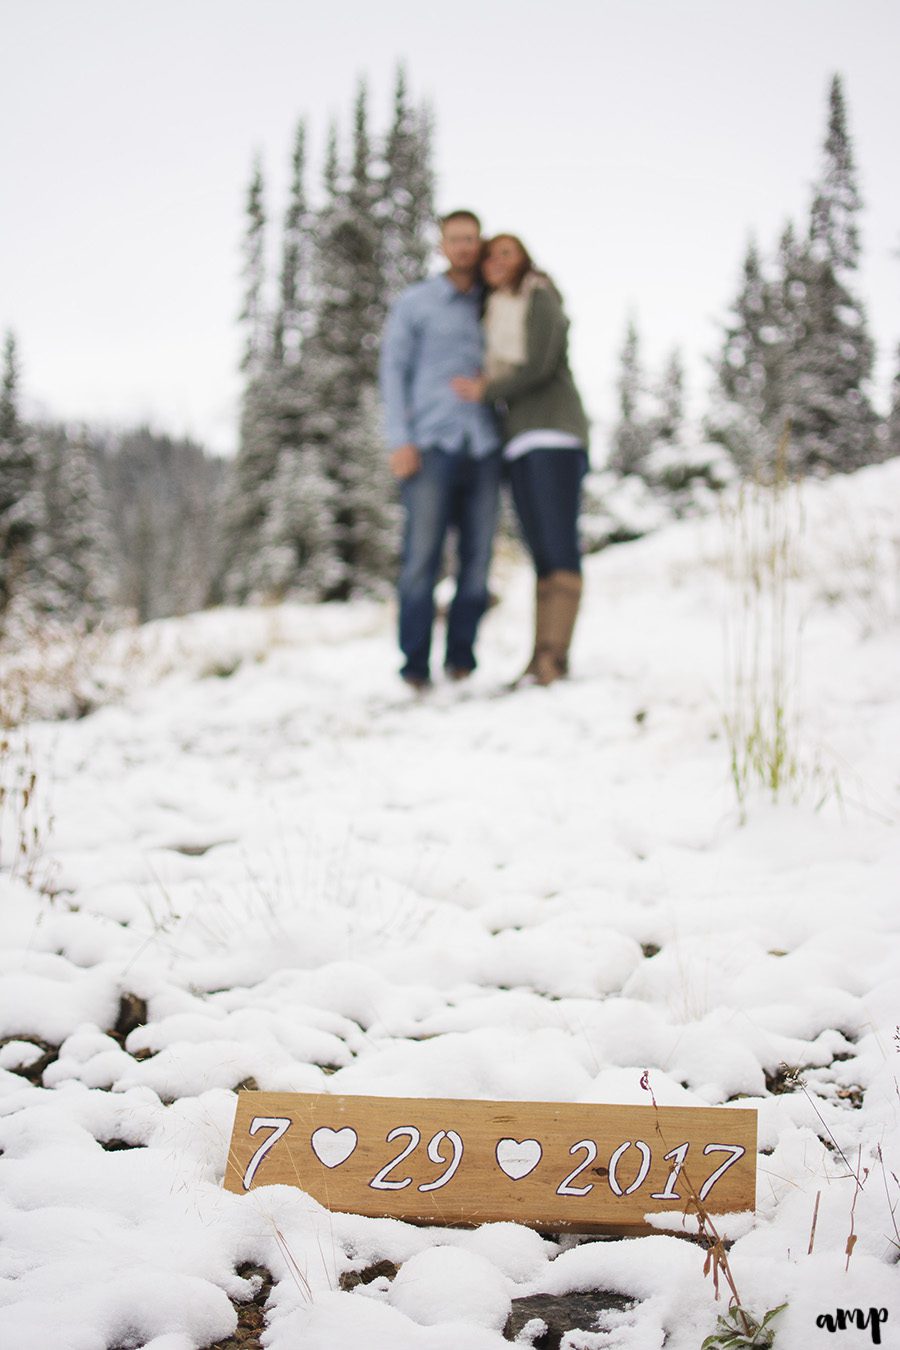 Crested Butte engagement photos | sunrise mountain engagement session